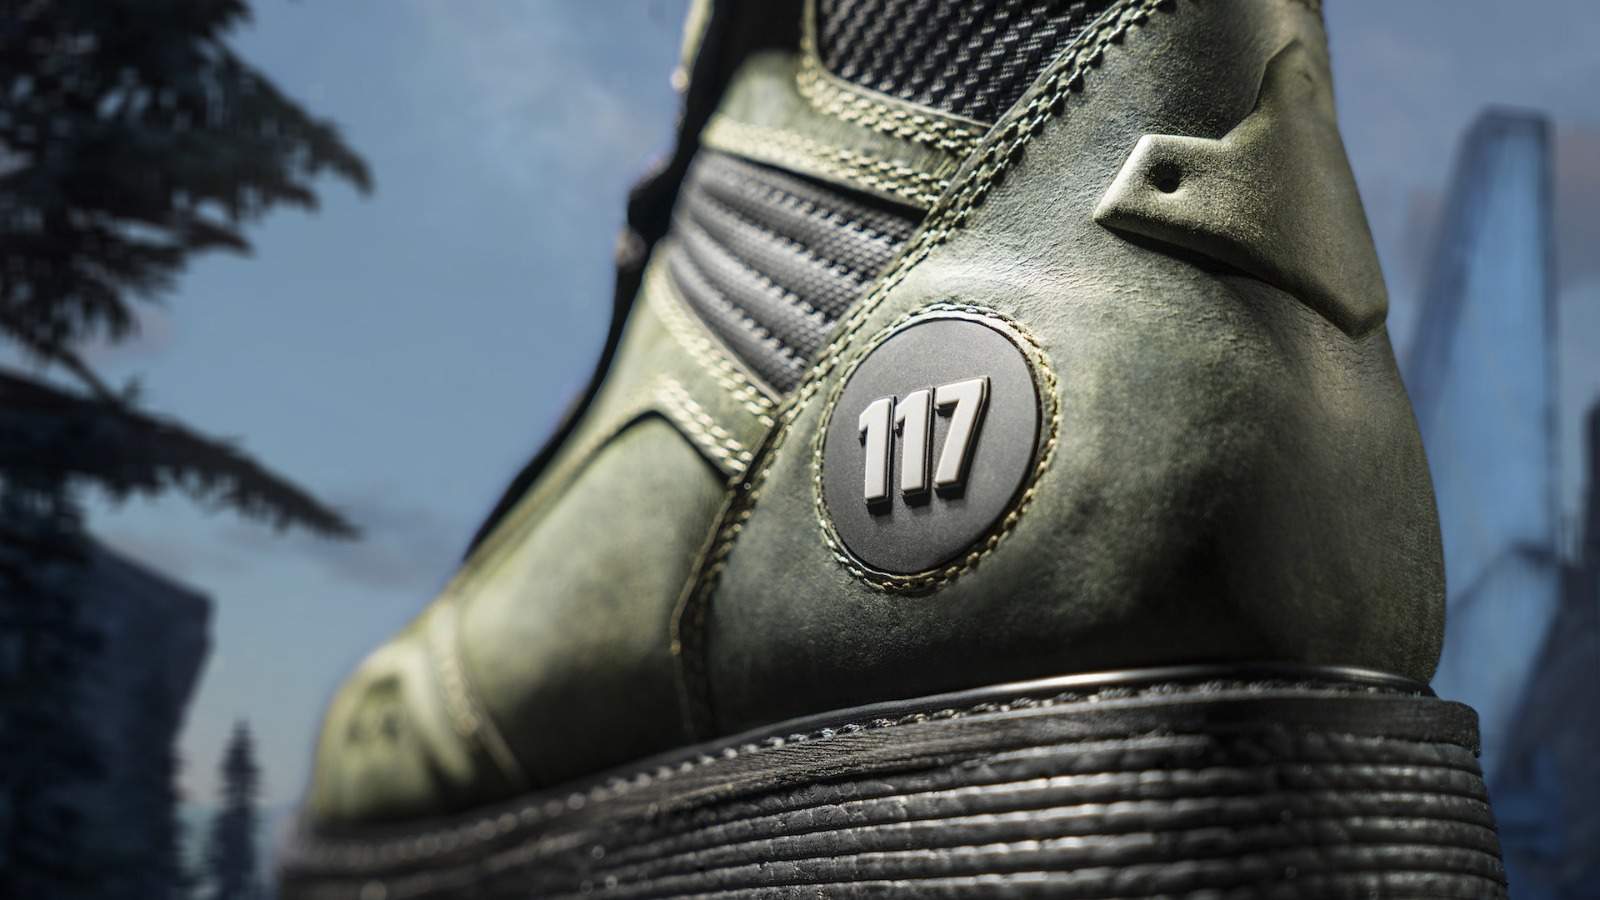 Promotional Image of the Wolverine 117 Halo Boot